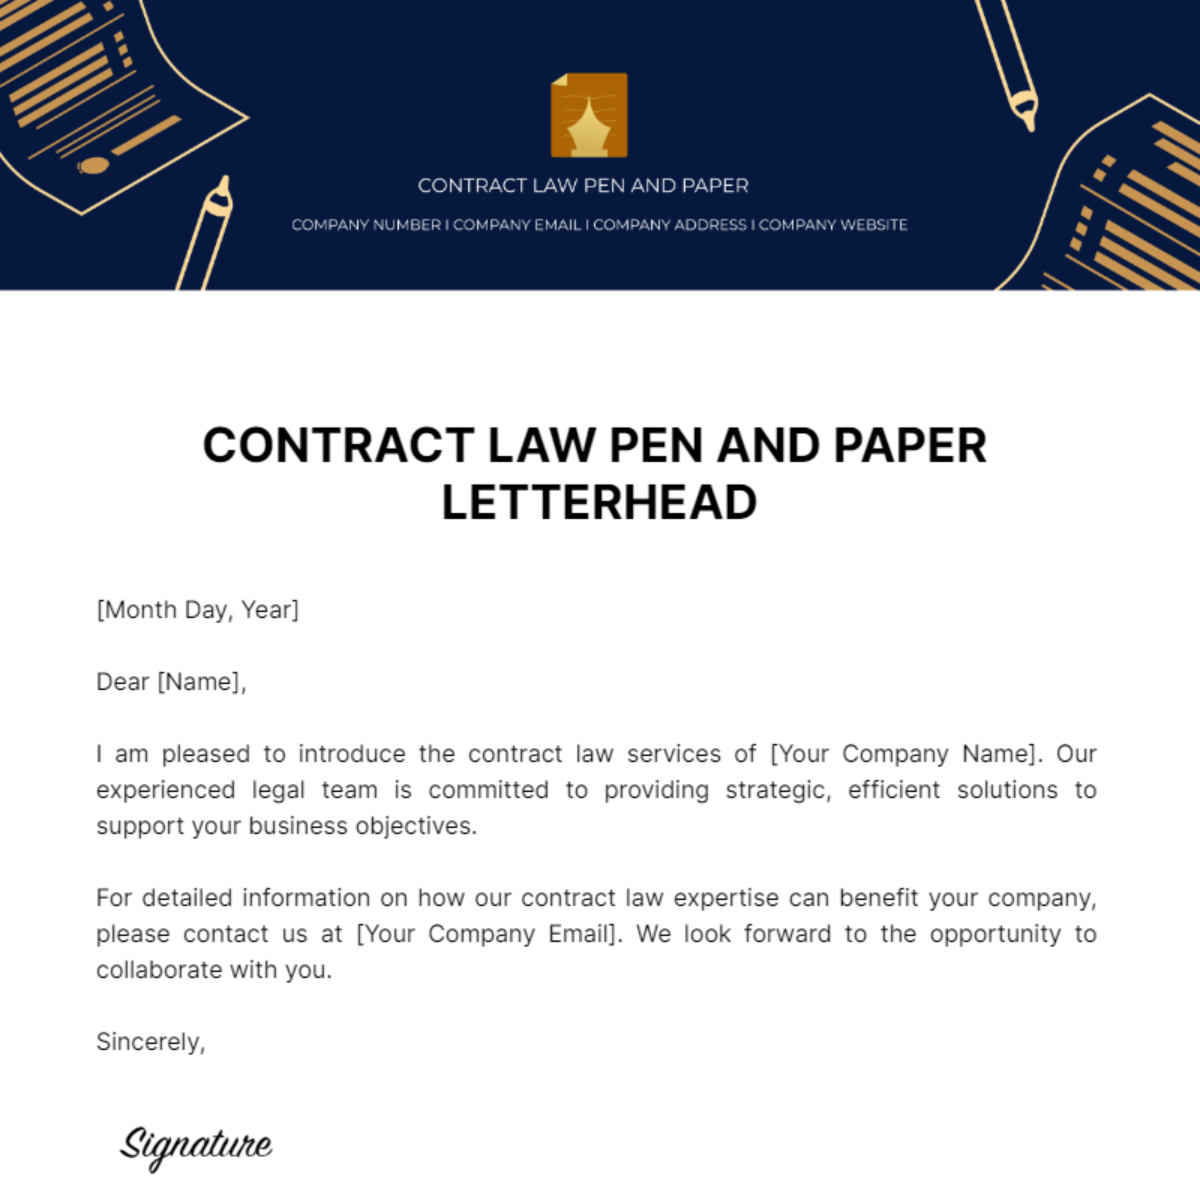 Contract Law Pen and Paper Letterhead Template